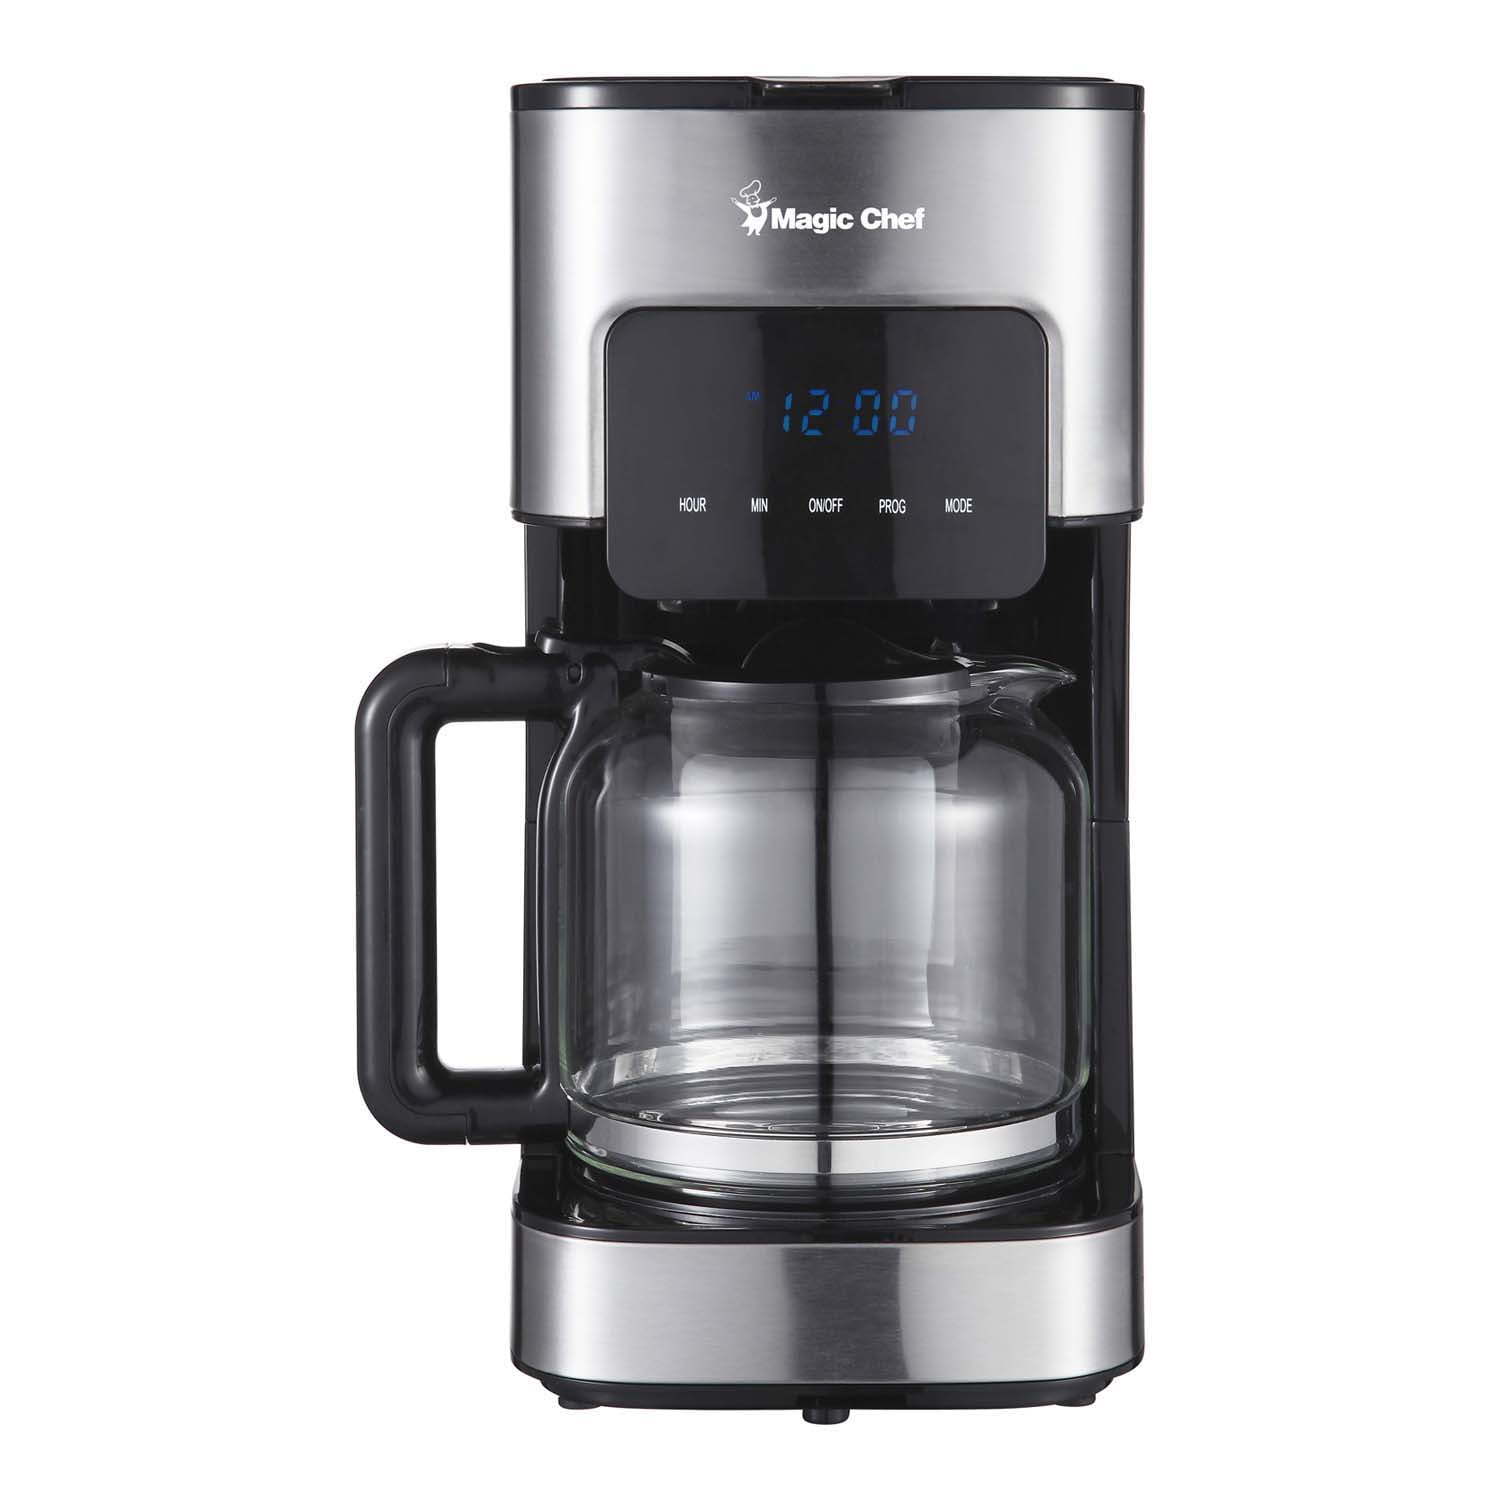 Magic Chef Programmable 12 Cup Coffee Maker Digital Display Stainless Steel 